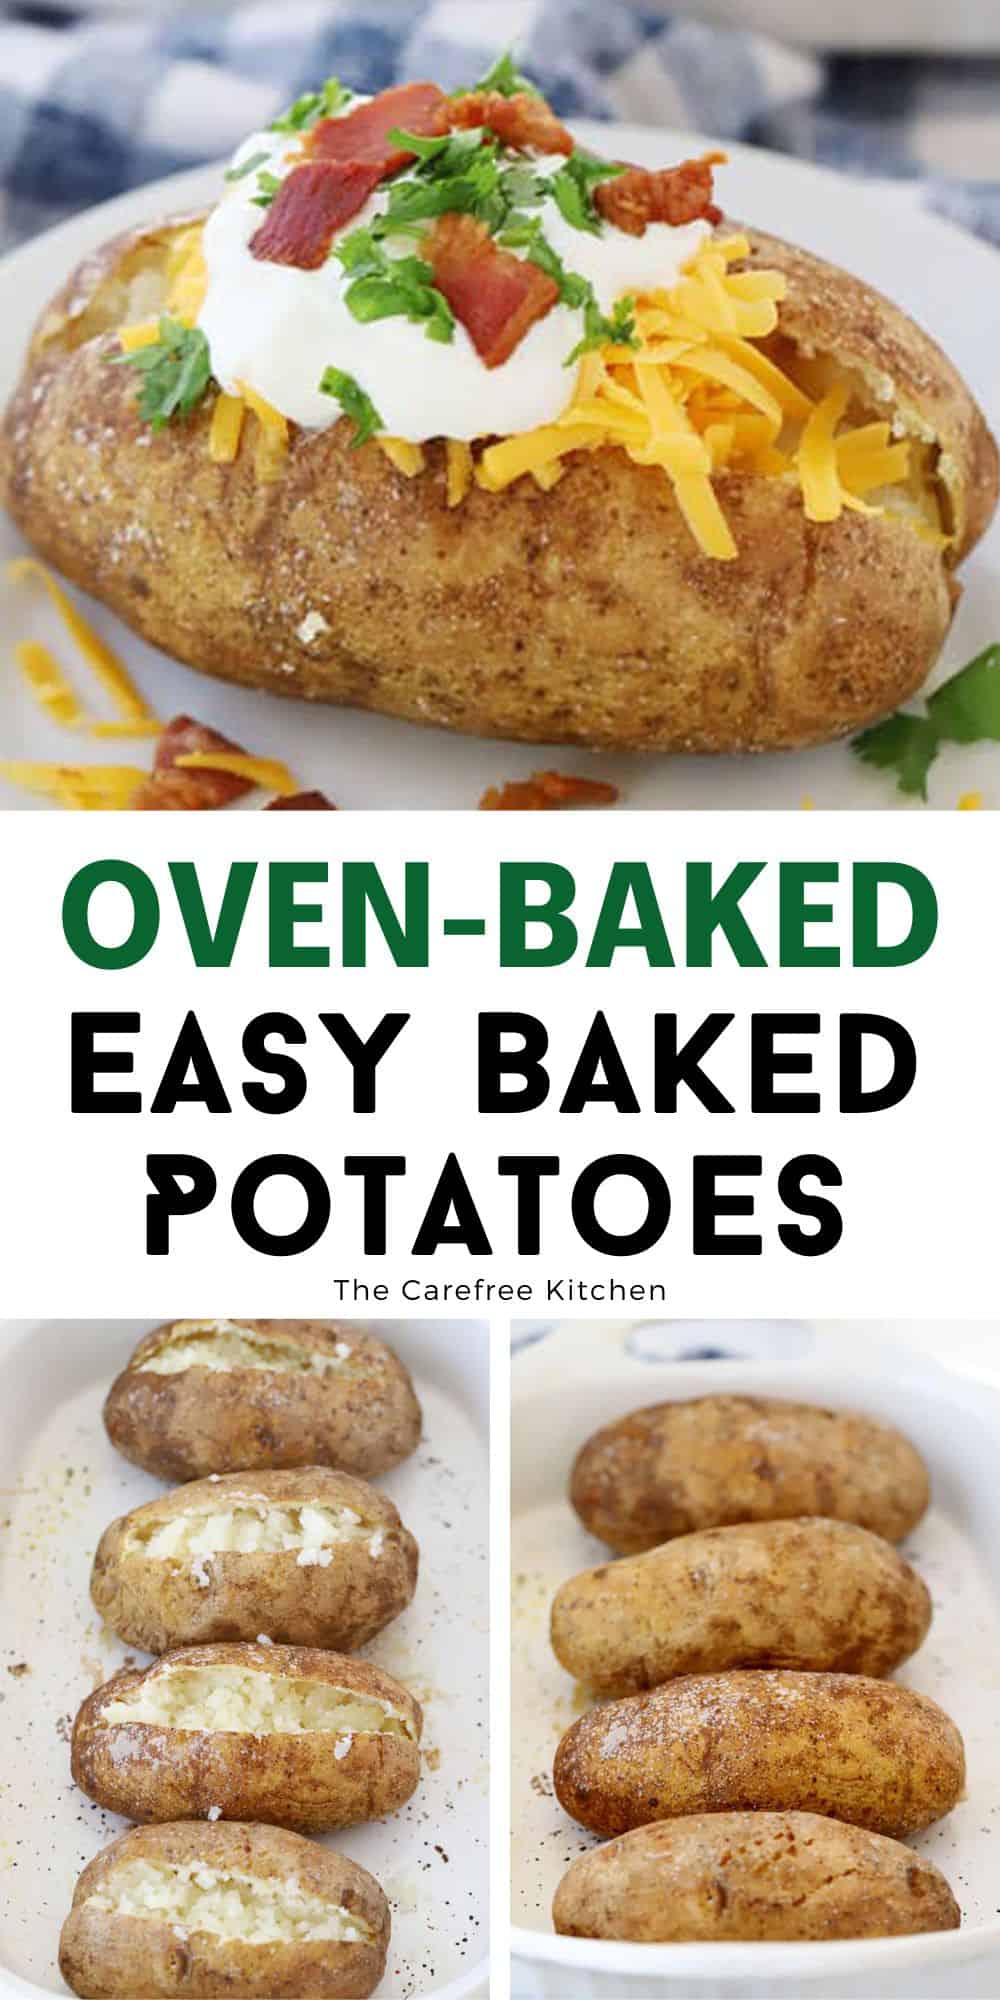 The Best Baked Potato Recipe - The Carefree Kitchen